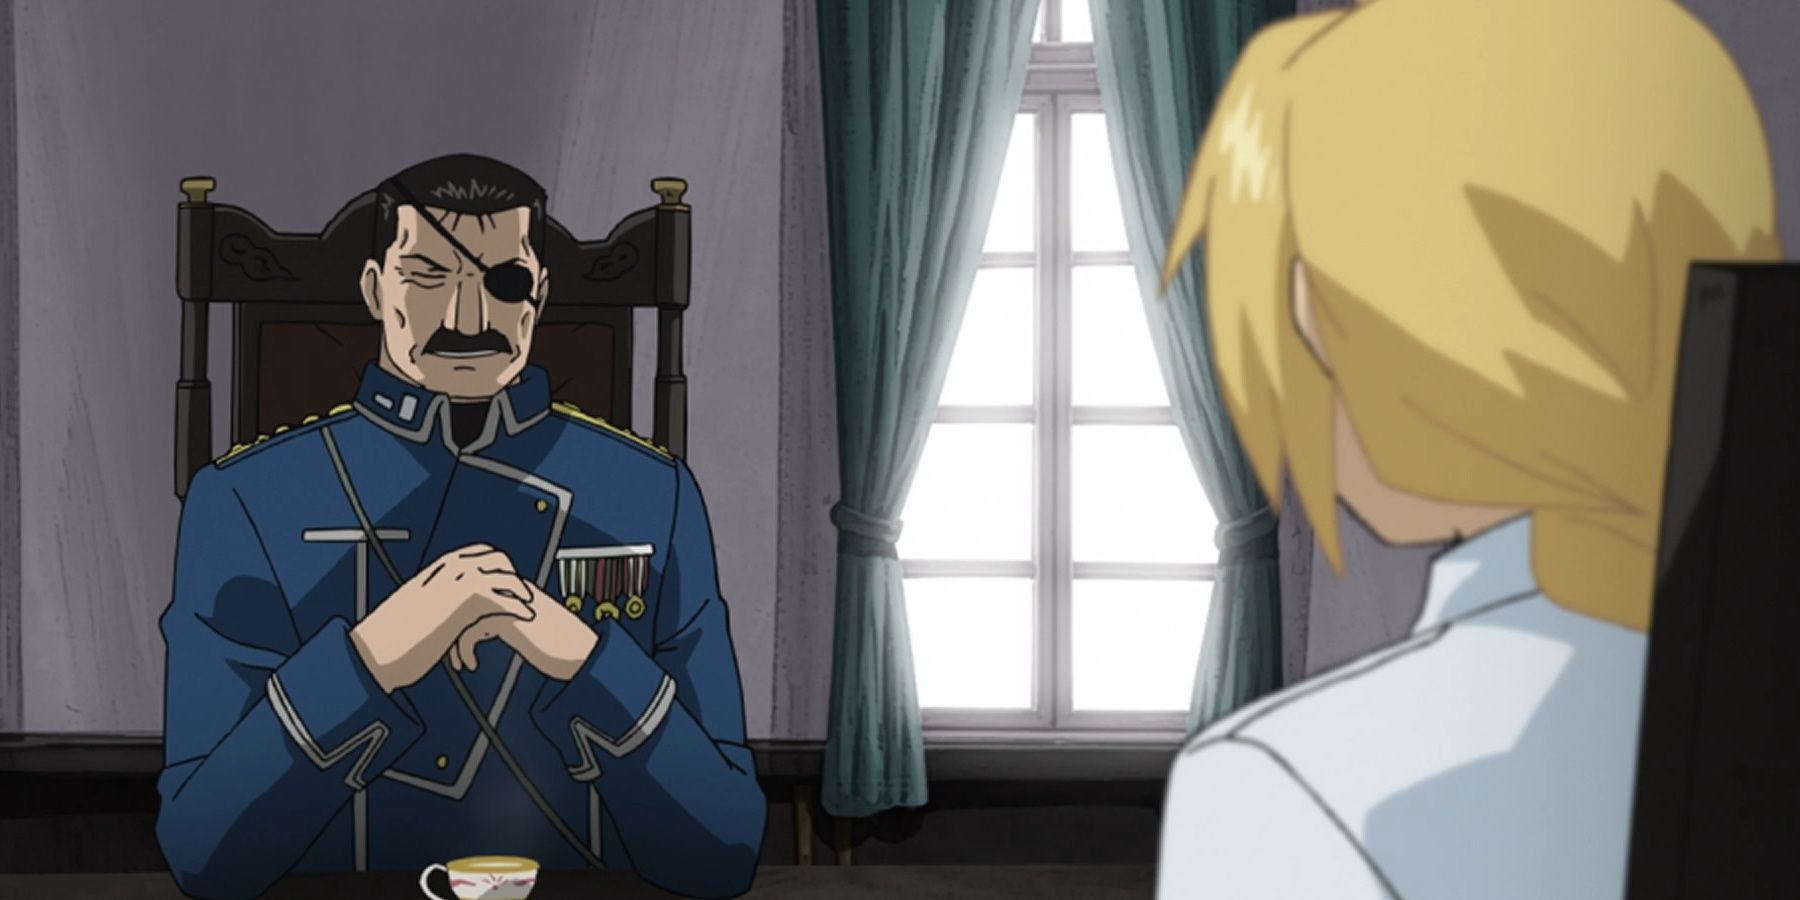 a general sitting across the table from a blonde character